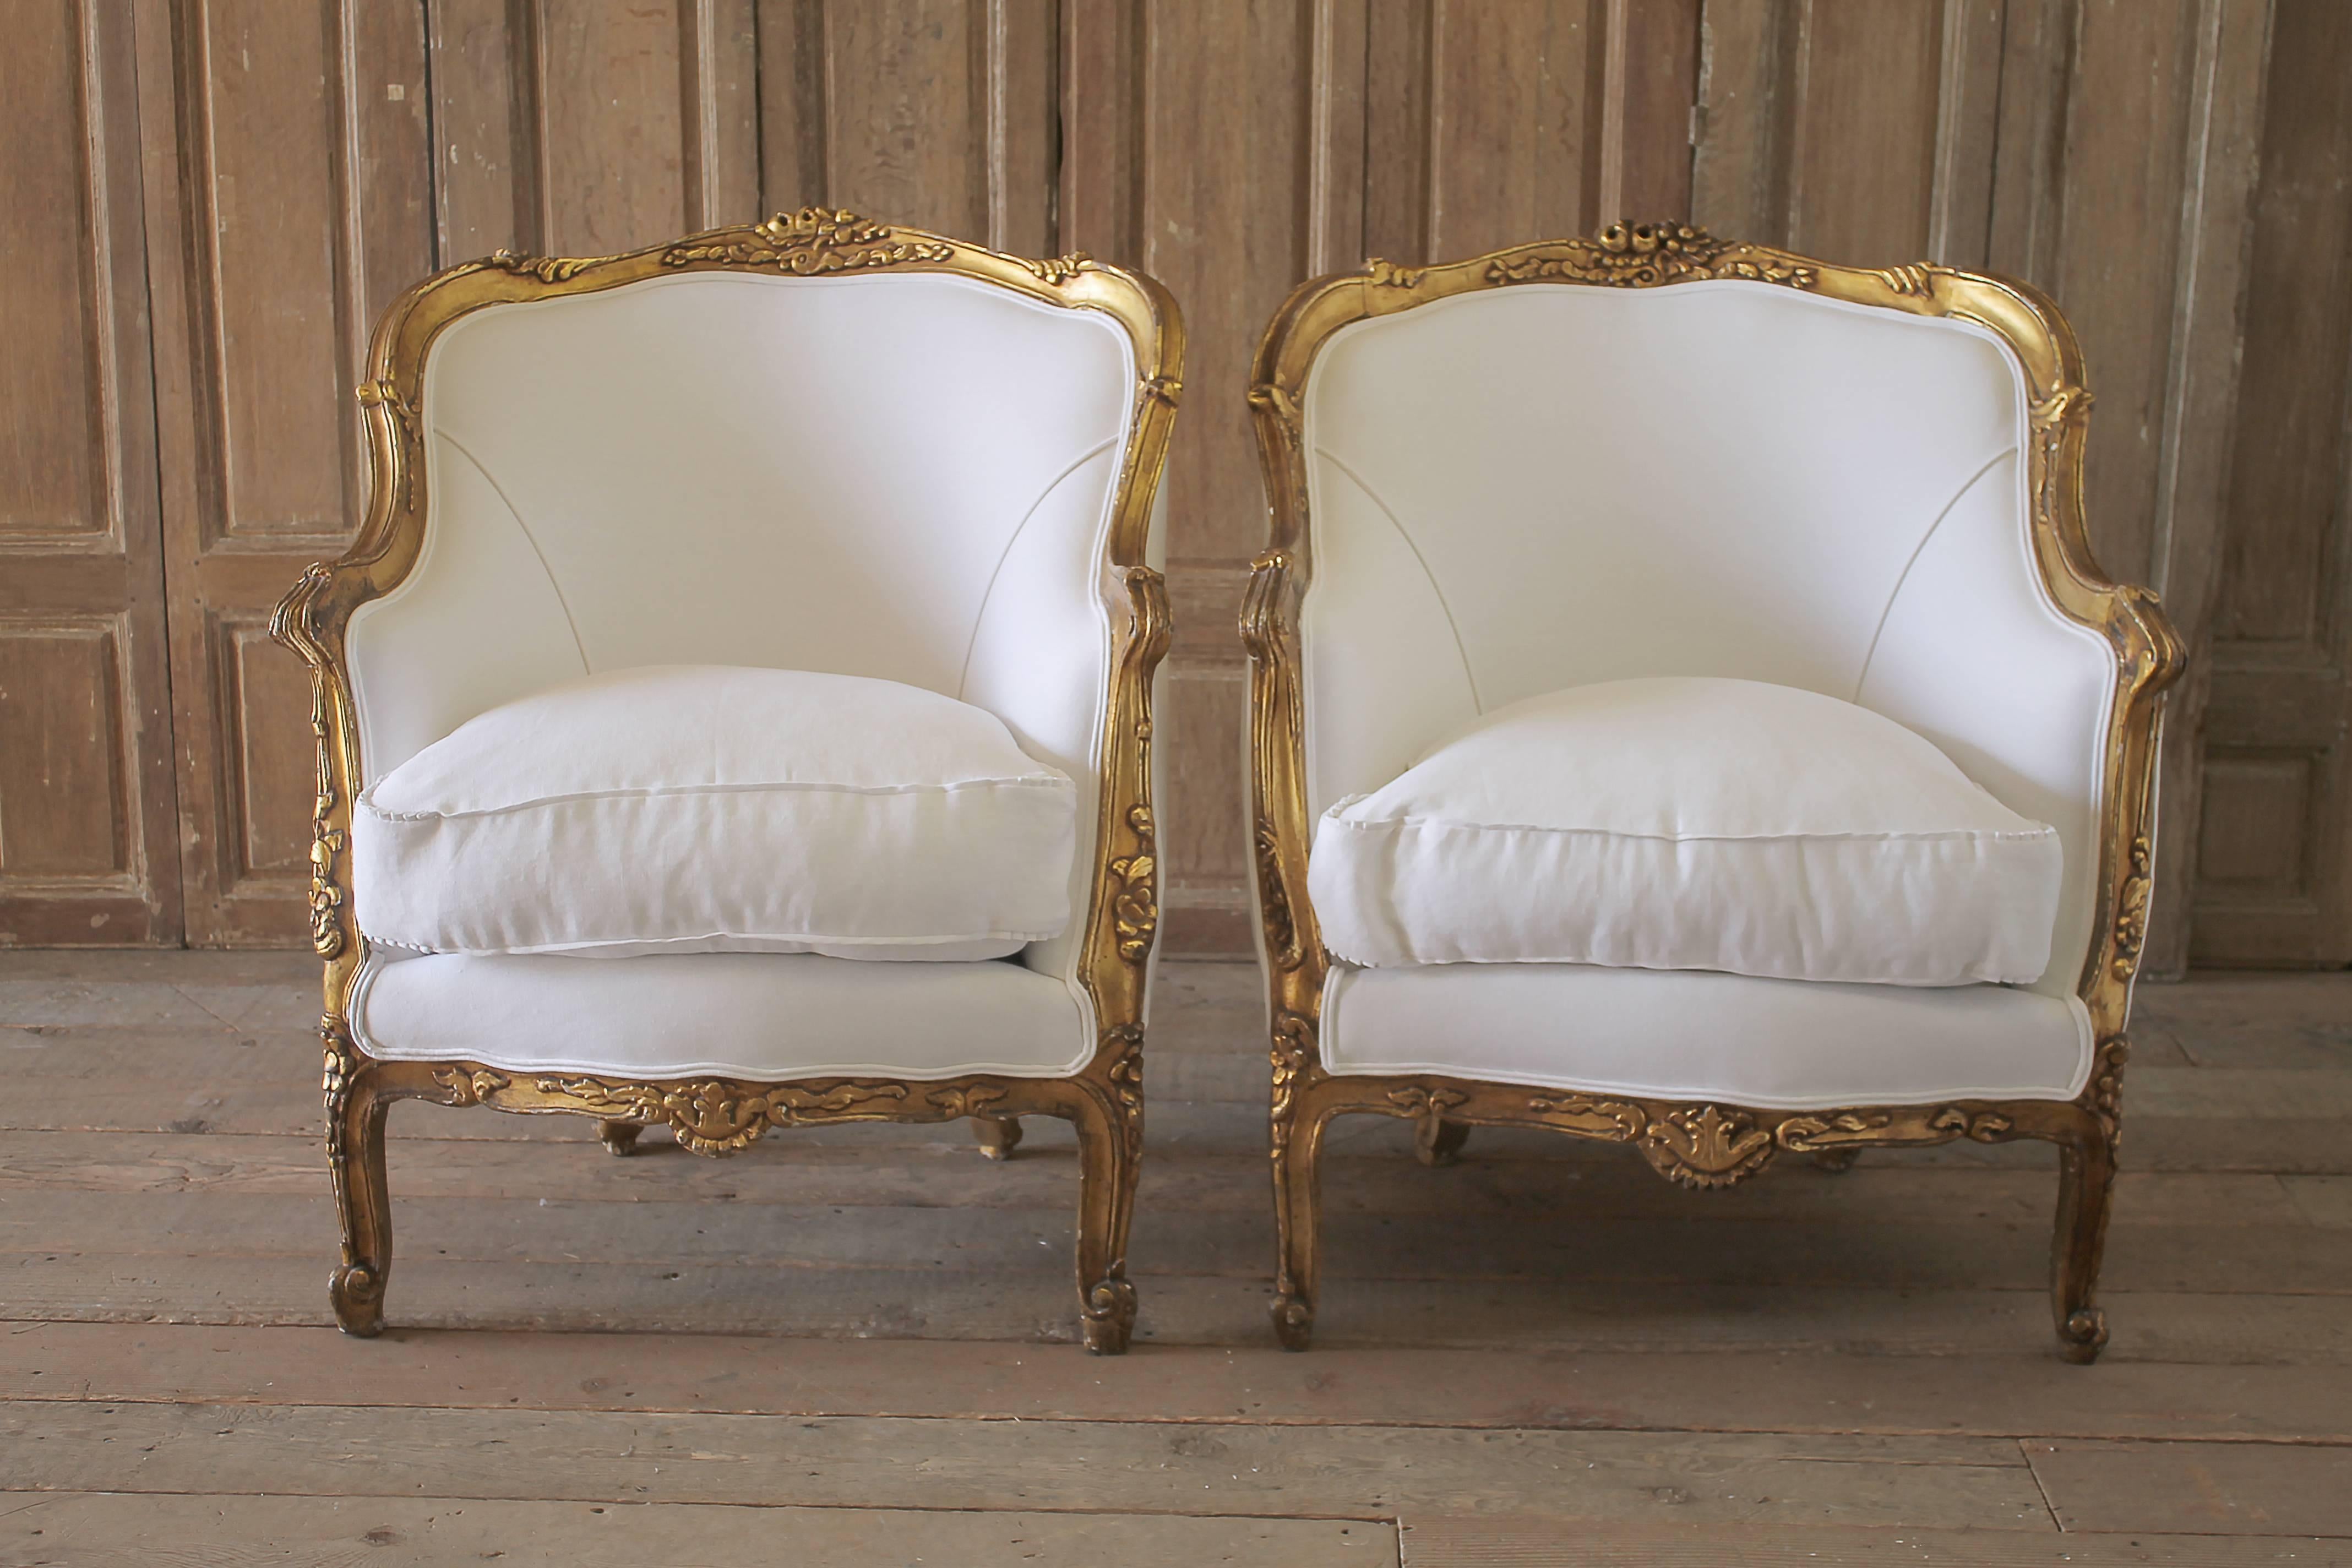 20th century giltwood carved bergere chairs in white Belgian linen
A brand new plump down cloud cushion has a zipper closure, finished with flange edge and pleated ruffle corners.
Measures: 30” W x 36” H x 30” D
Seat height 19”, seat depth 20”,